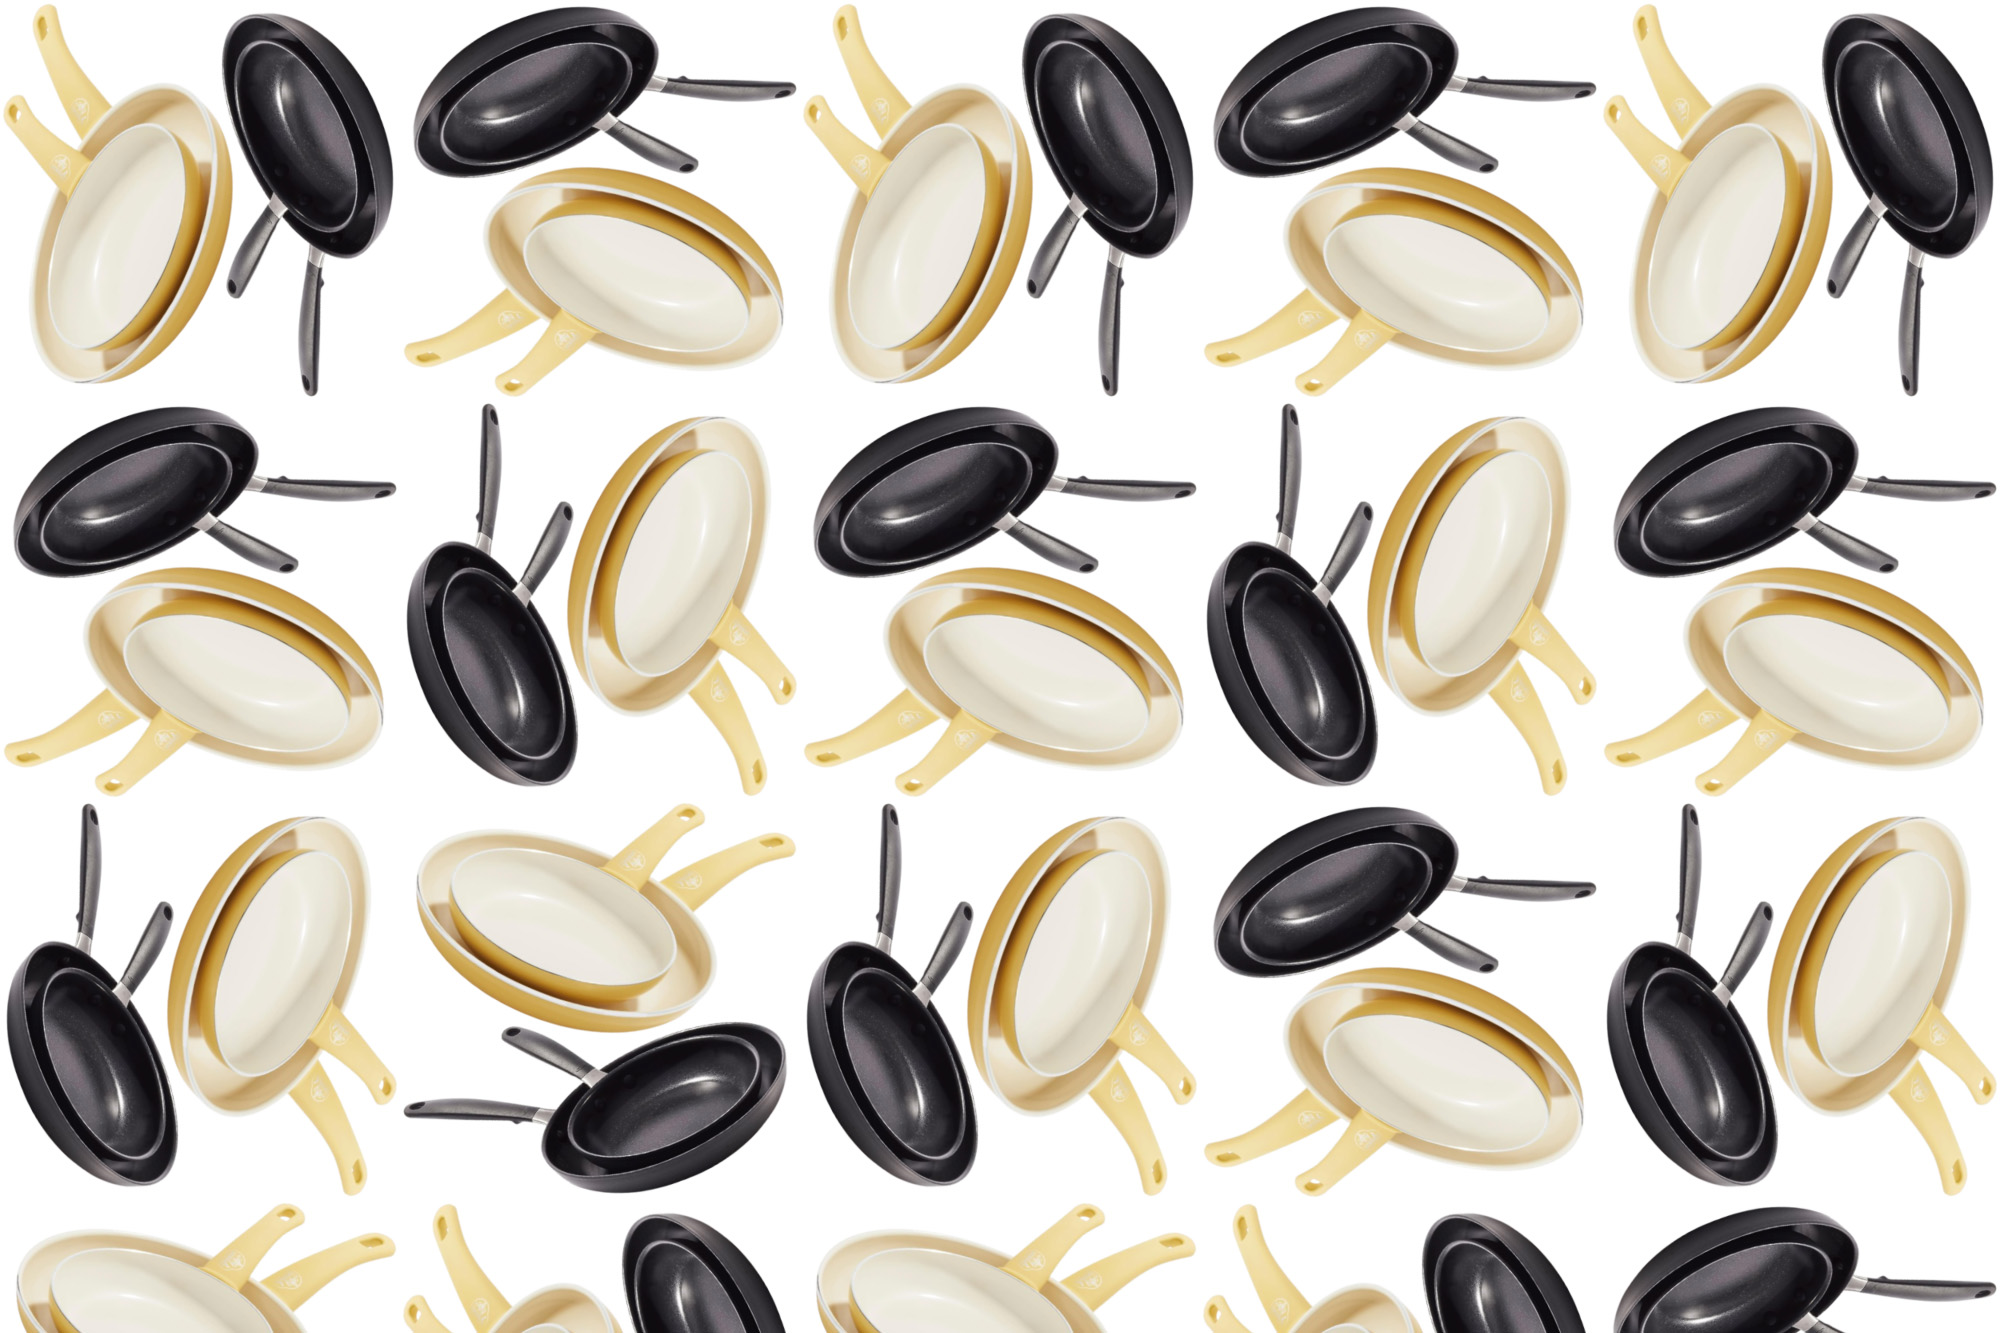 Pots and pans in a pattern on a white background